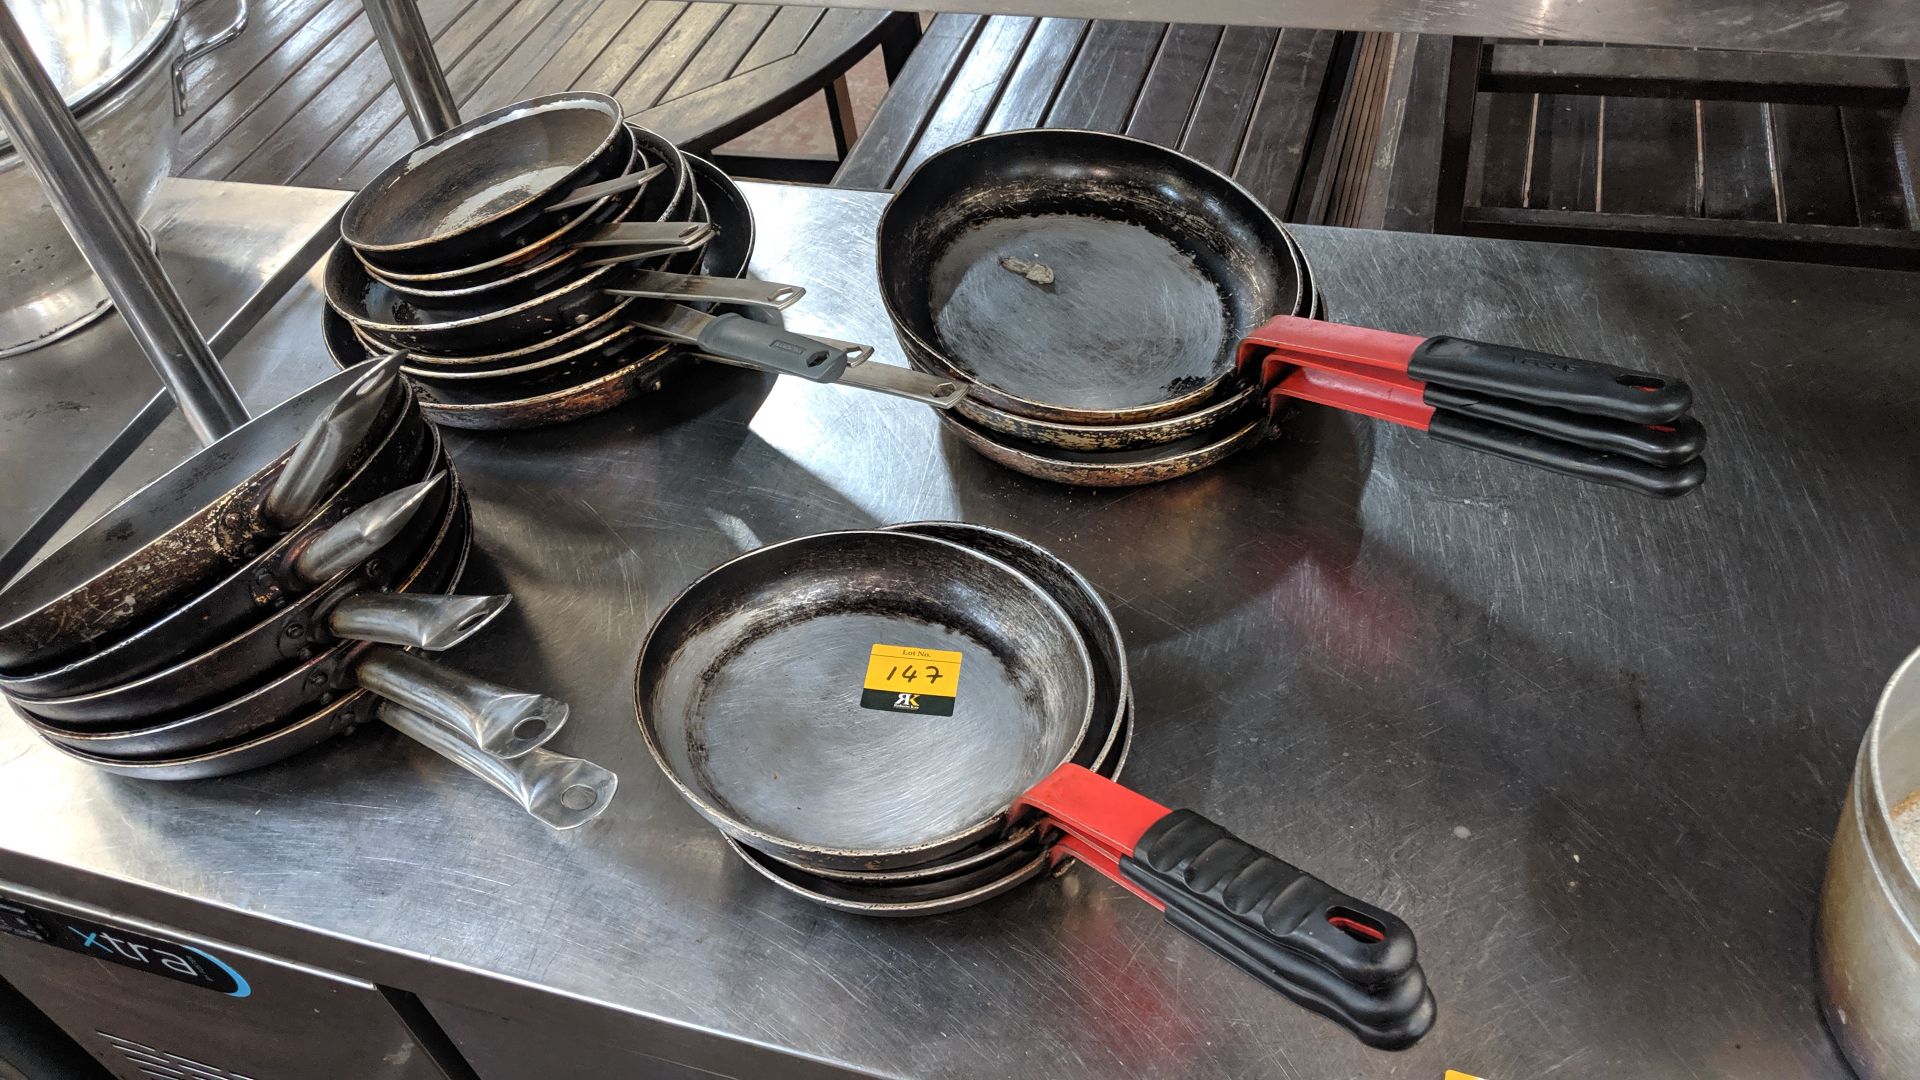 4 stacks of skillets & frying pans - approximately 18 pans in total This is one of a number of